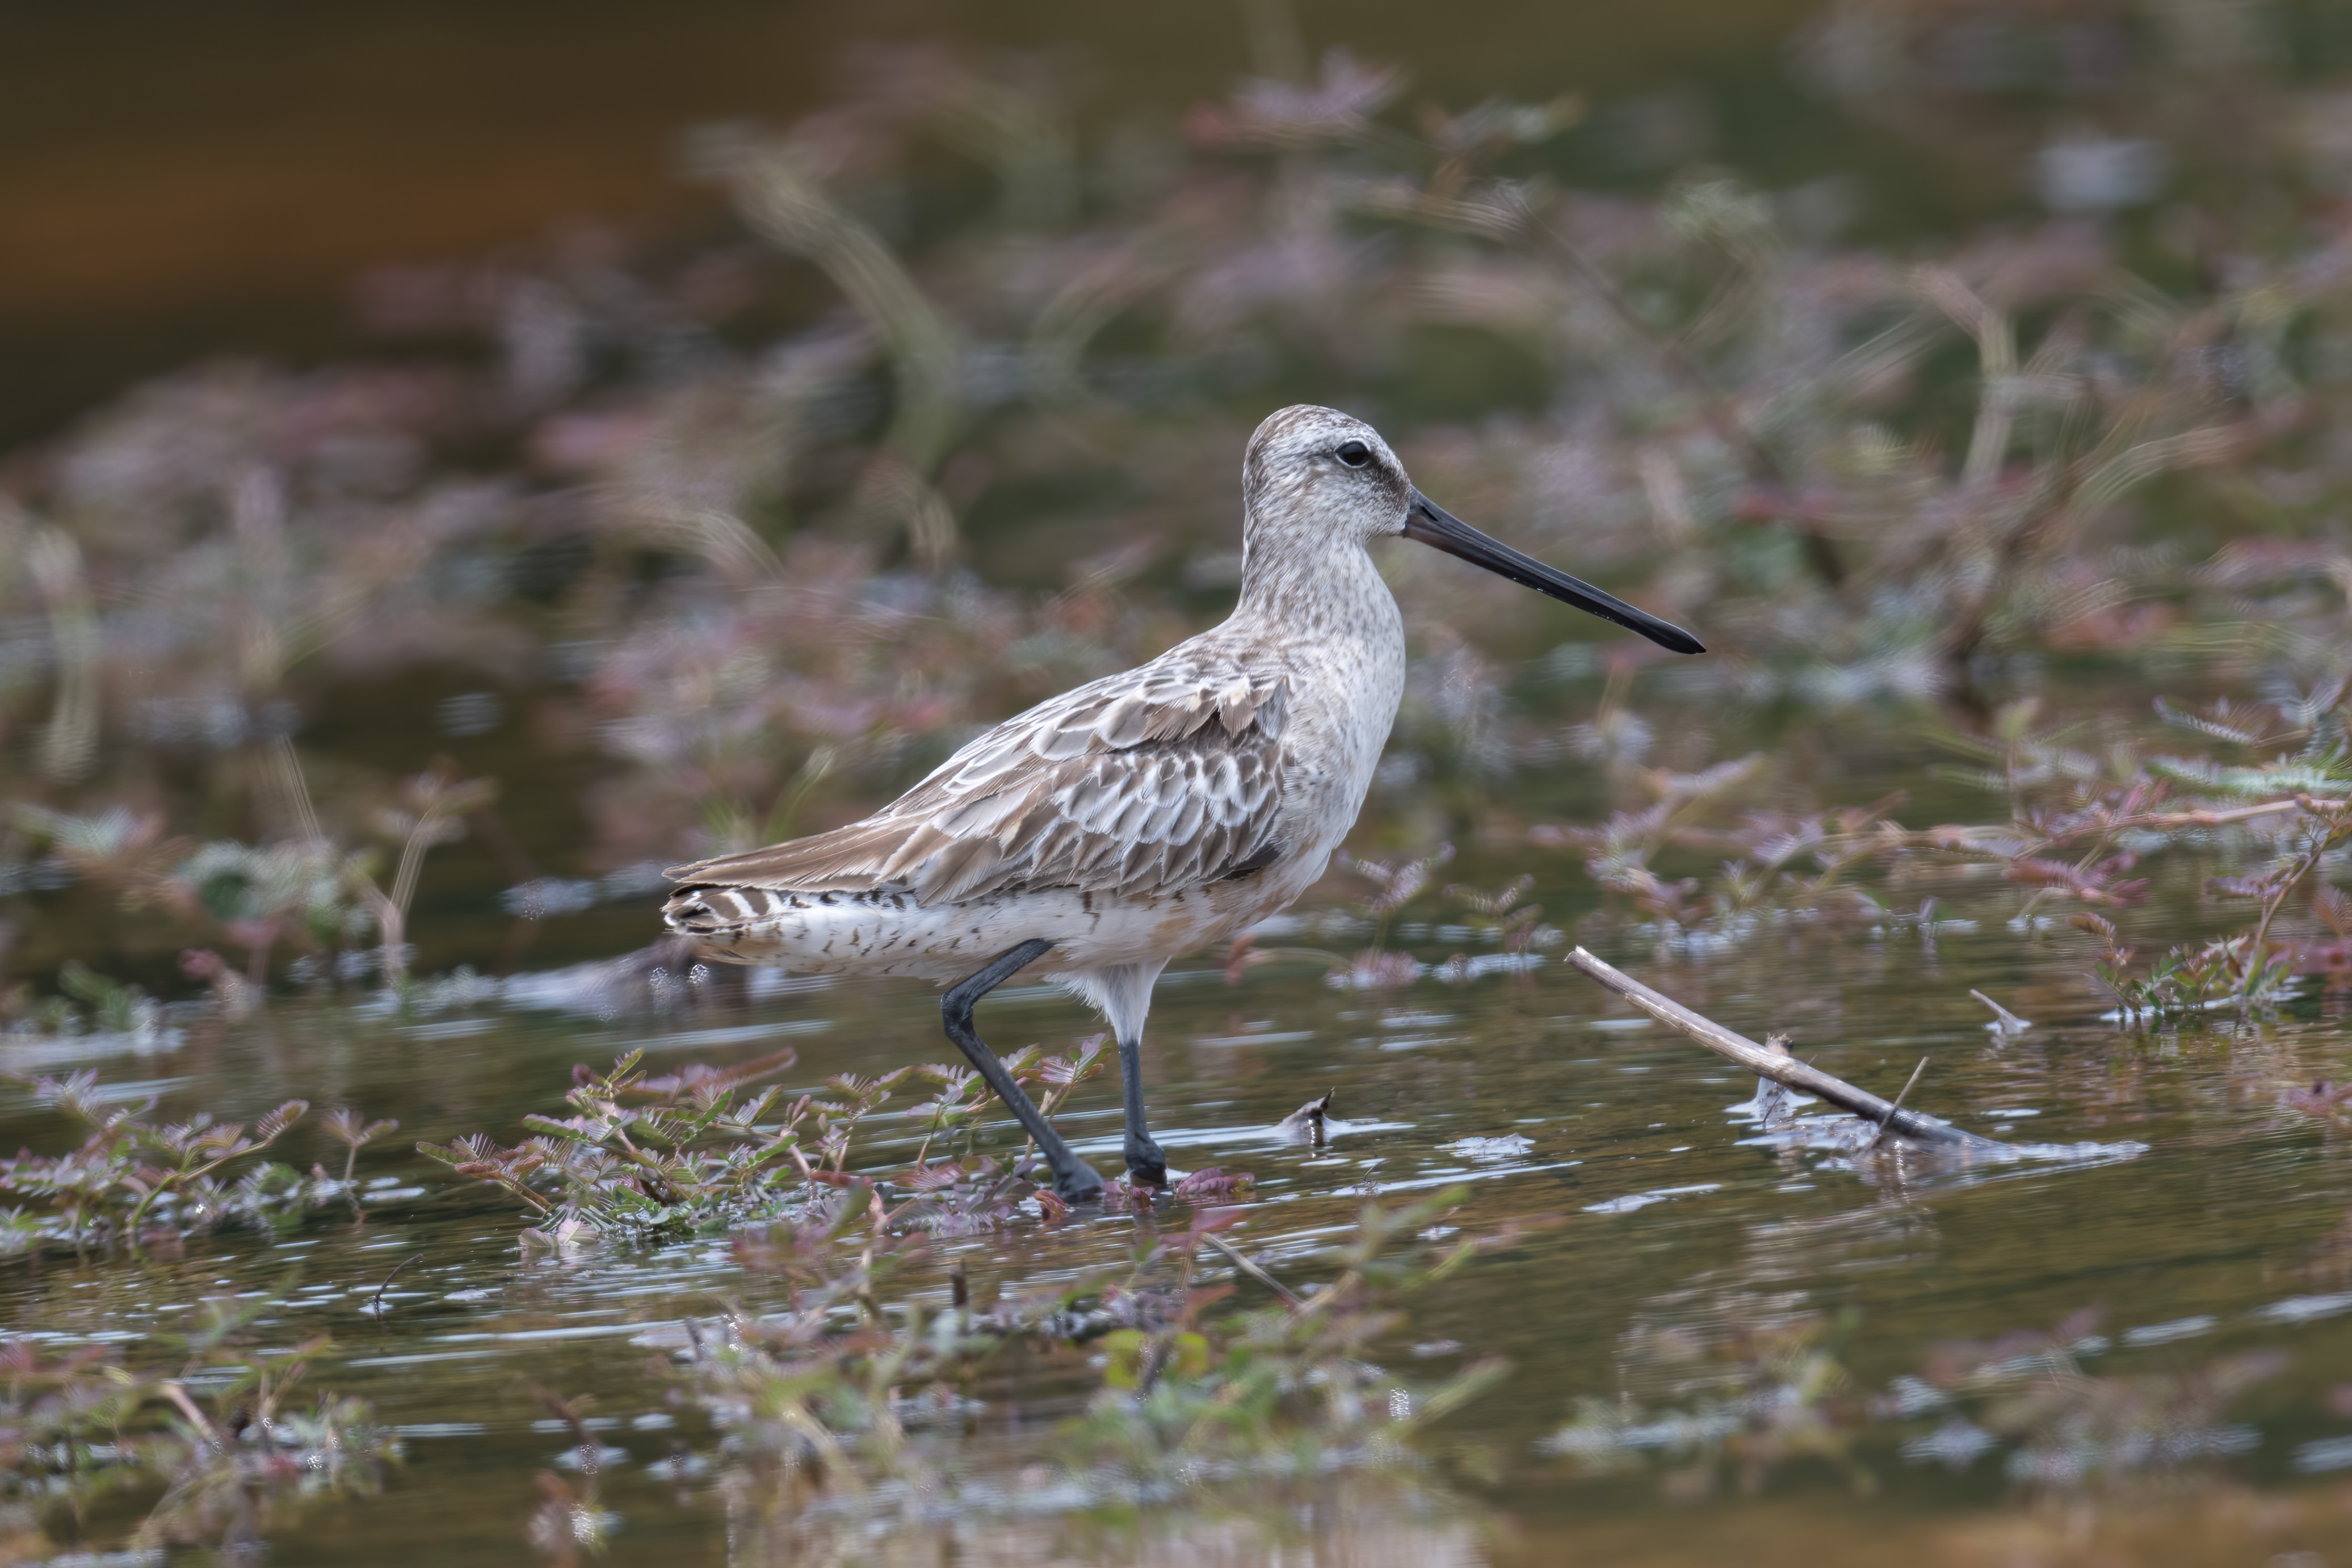 Asian Dowitcher at Marina East Drive on 28 Aug 2022. Photo credit: Michael Hooper